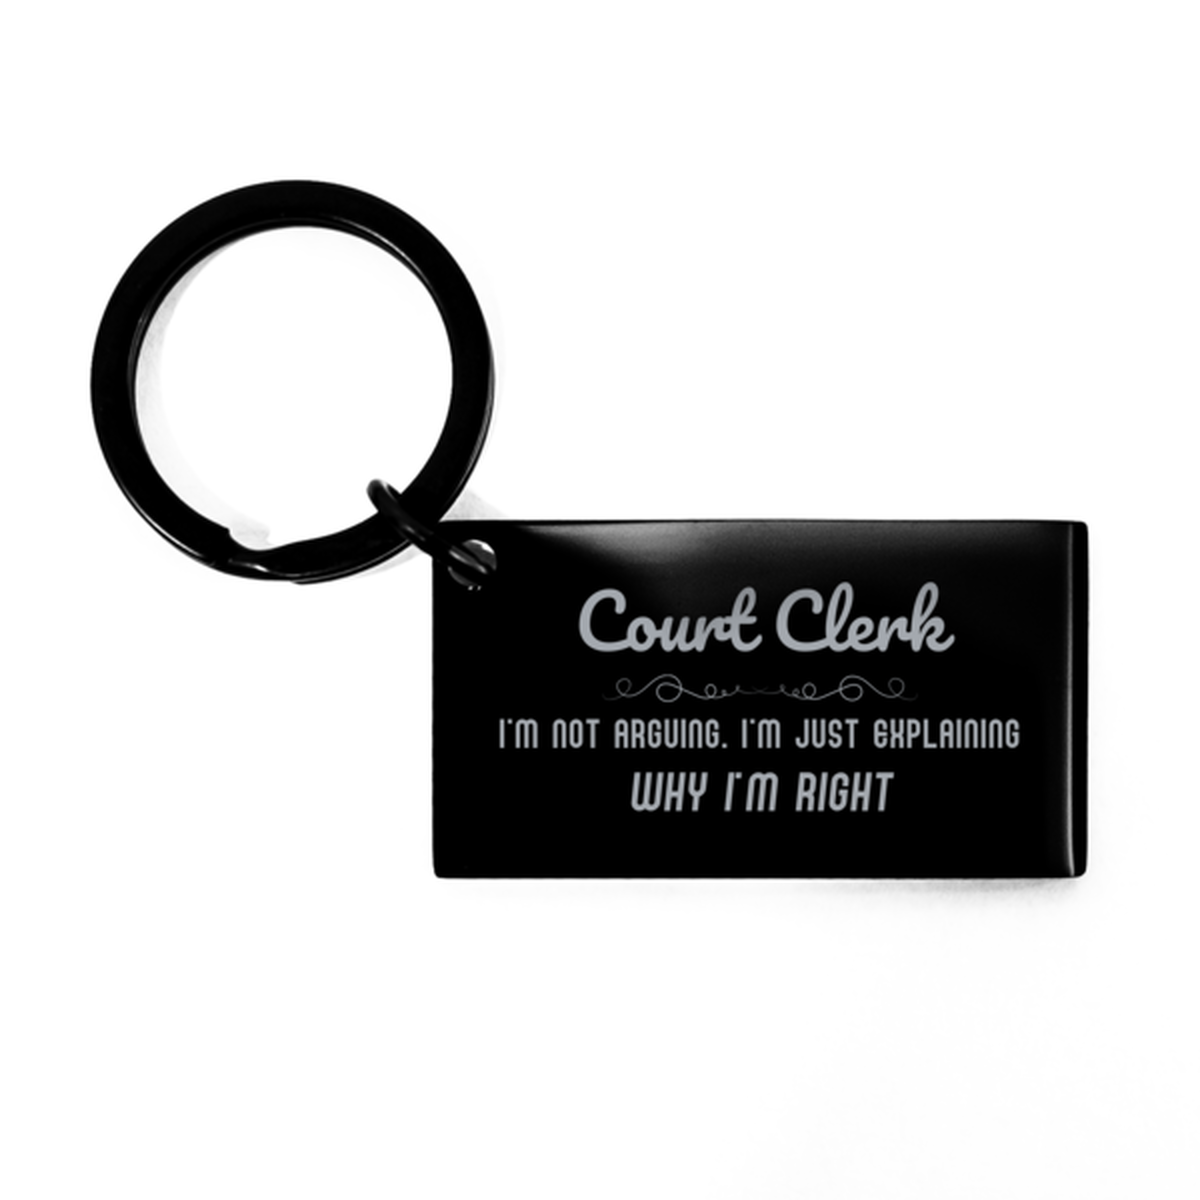 Court Clerk I'm not Arguing. I'm Just Explaining Why I'm RIGHT Keychain, Funny Saying Quote Court Clerk Gifts For Court Clerk Graduation Birthday Christmas Gifts for Men Women Coworker